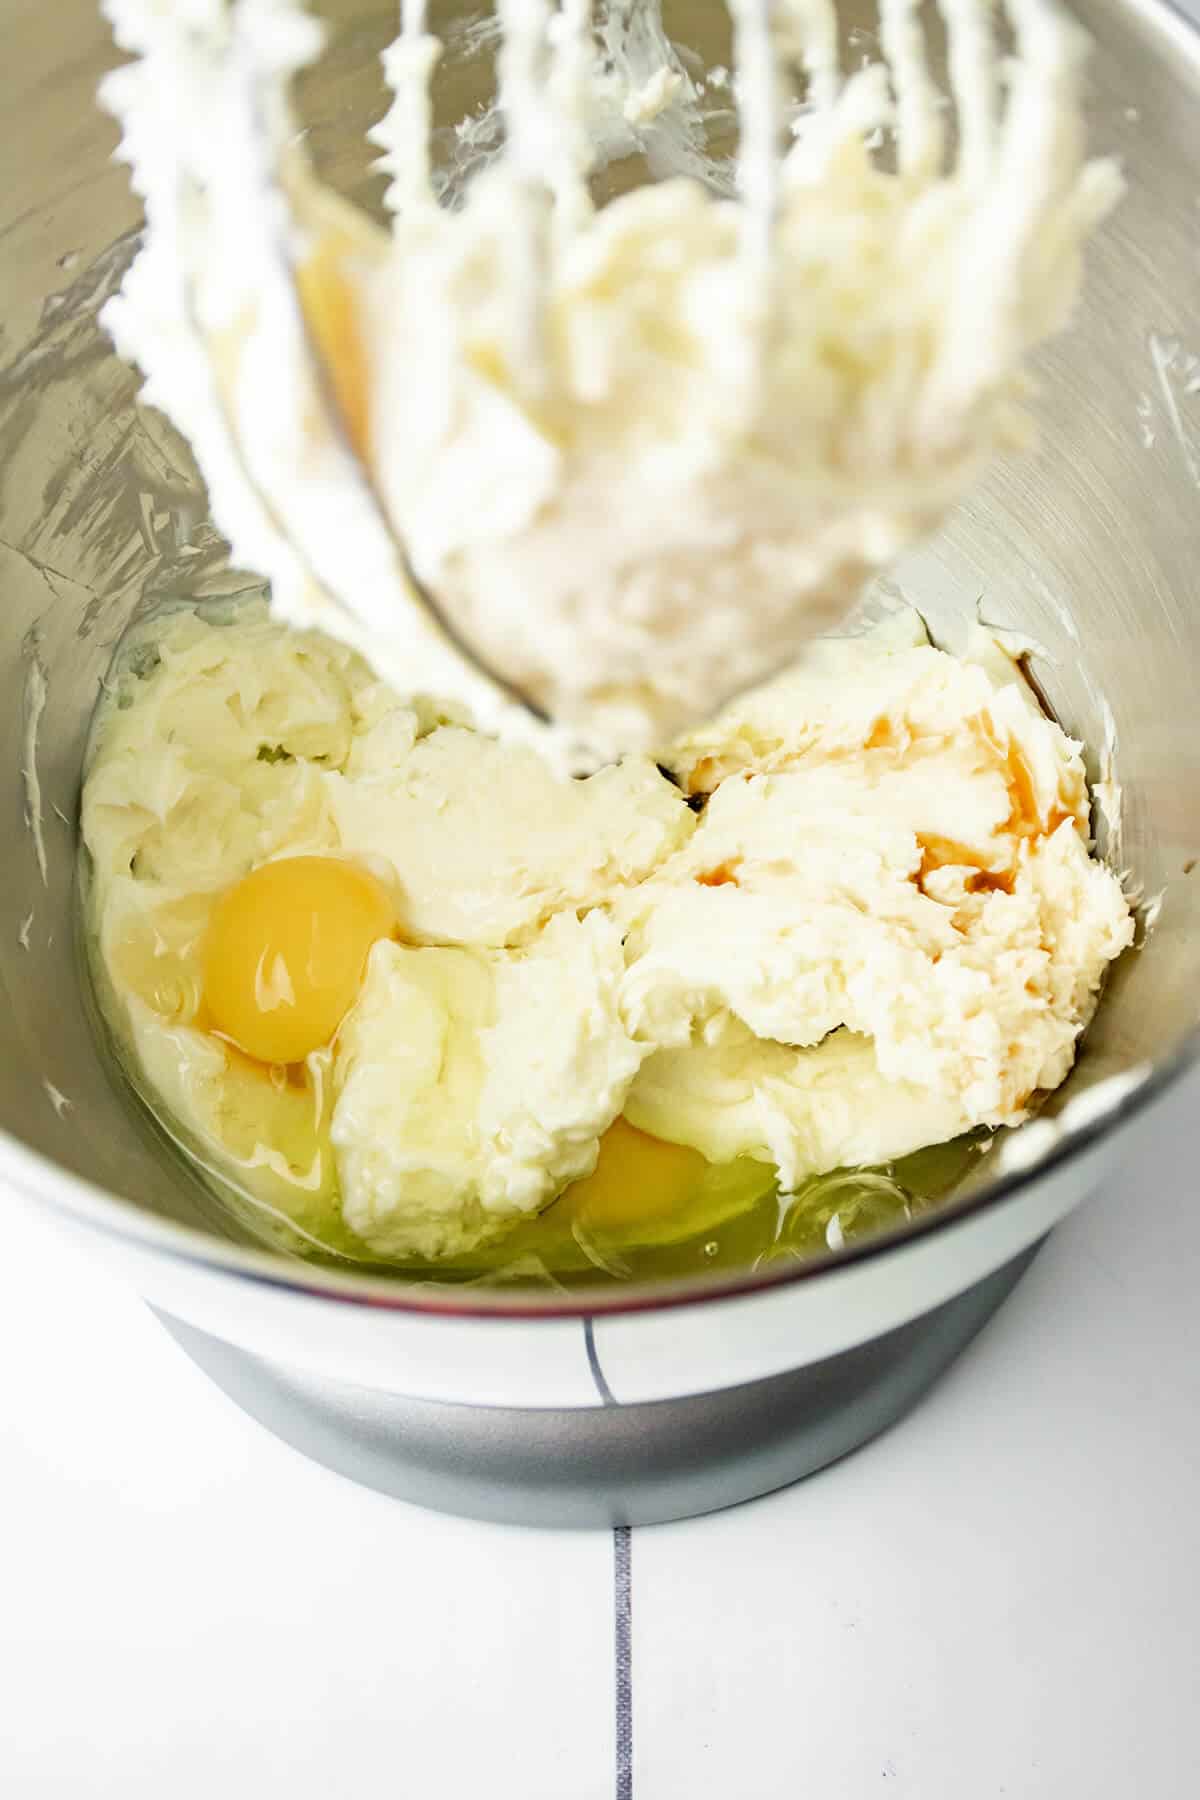 Eggs and vanilla added to cream cheese mixture.